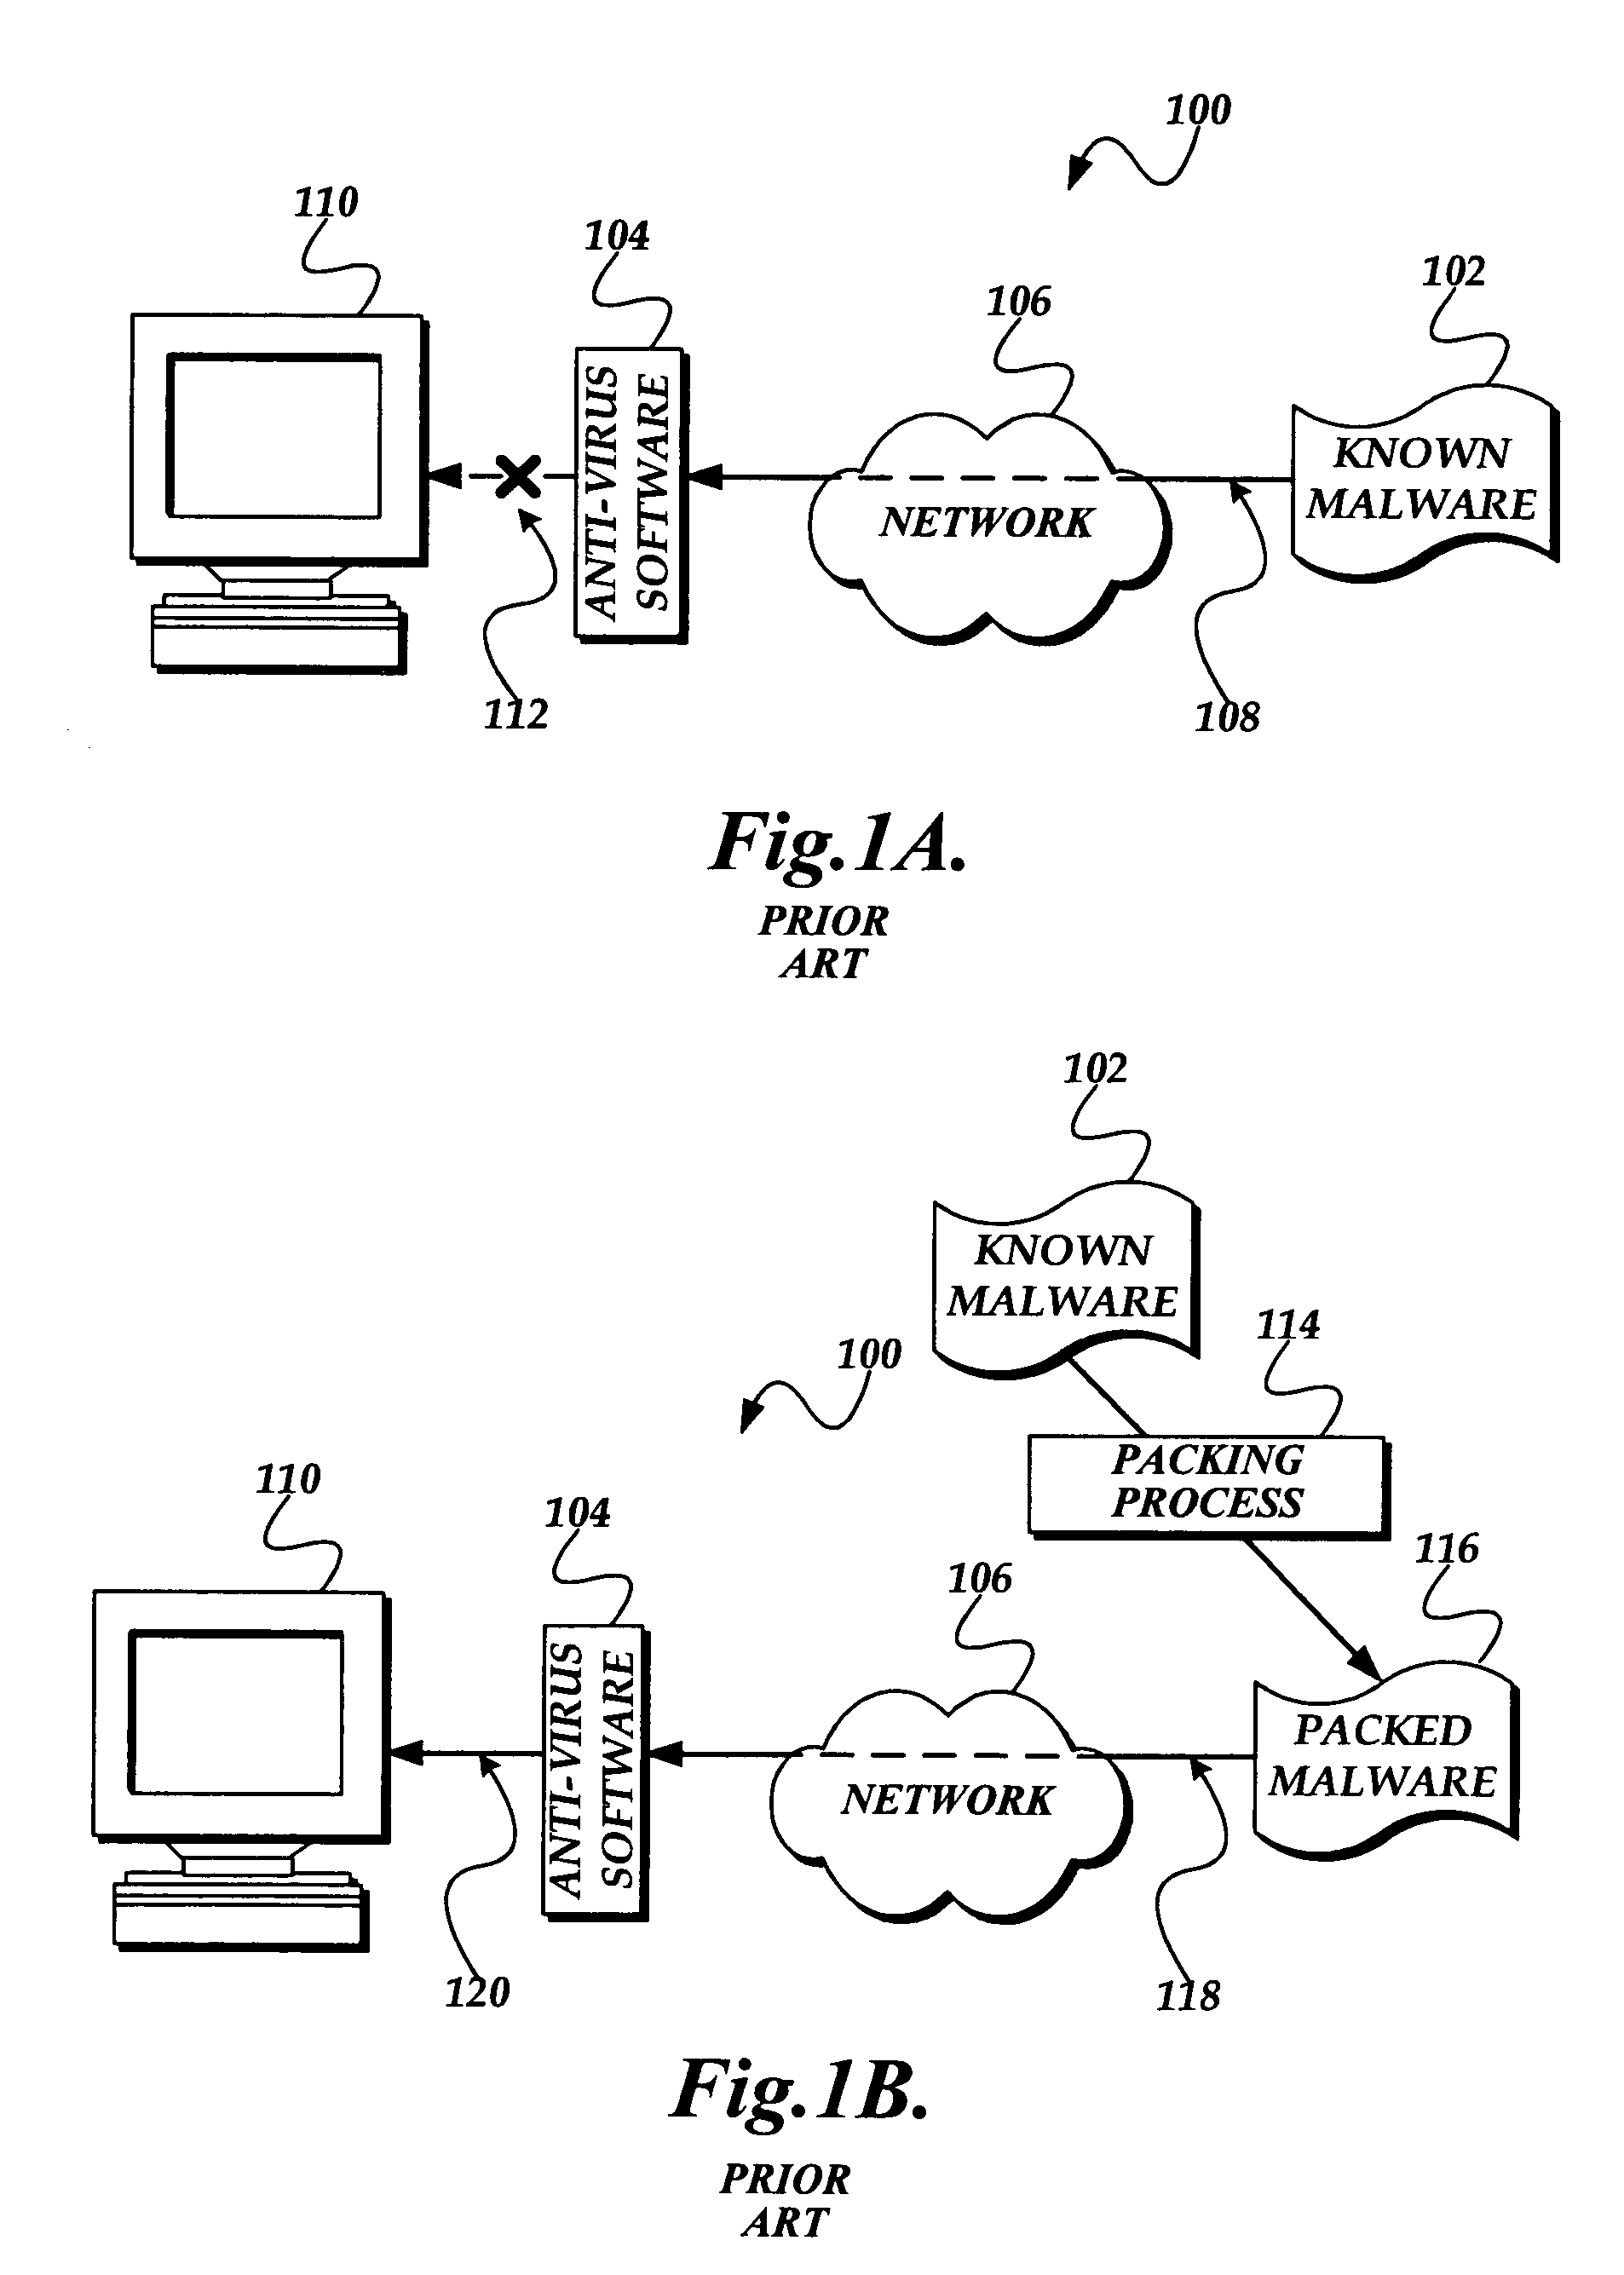 System and method for unpacking packed executables for malware evaluation